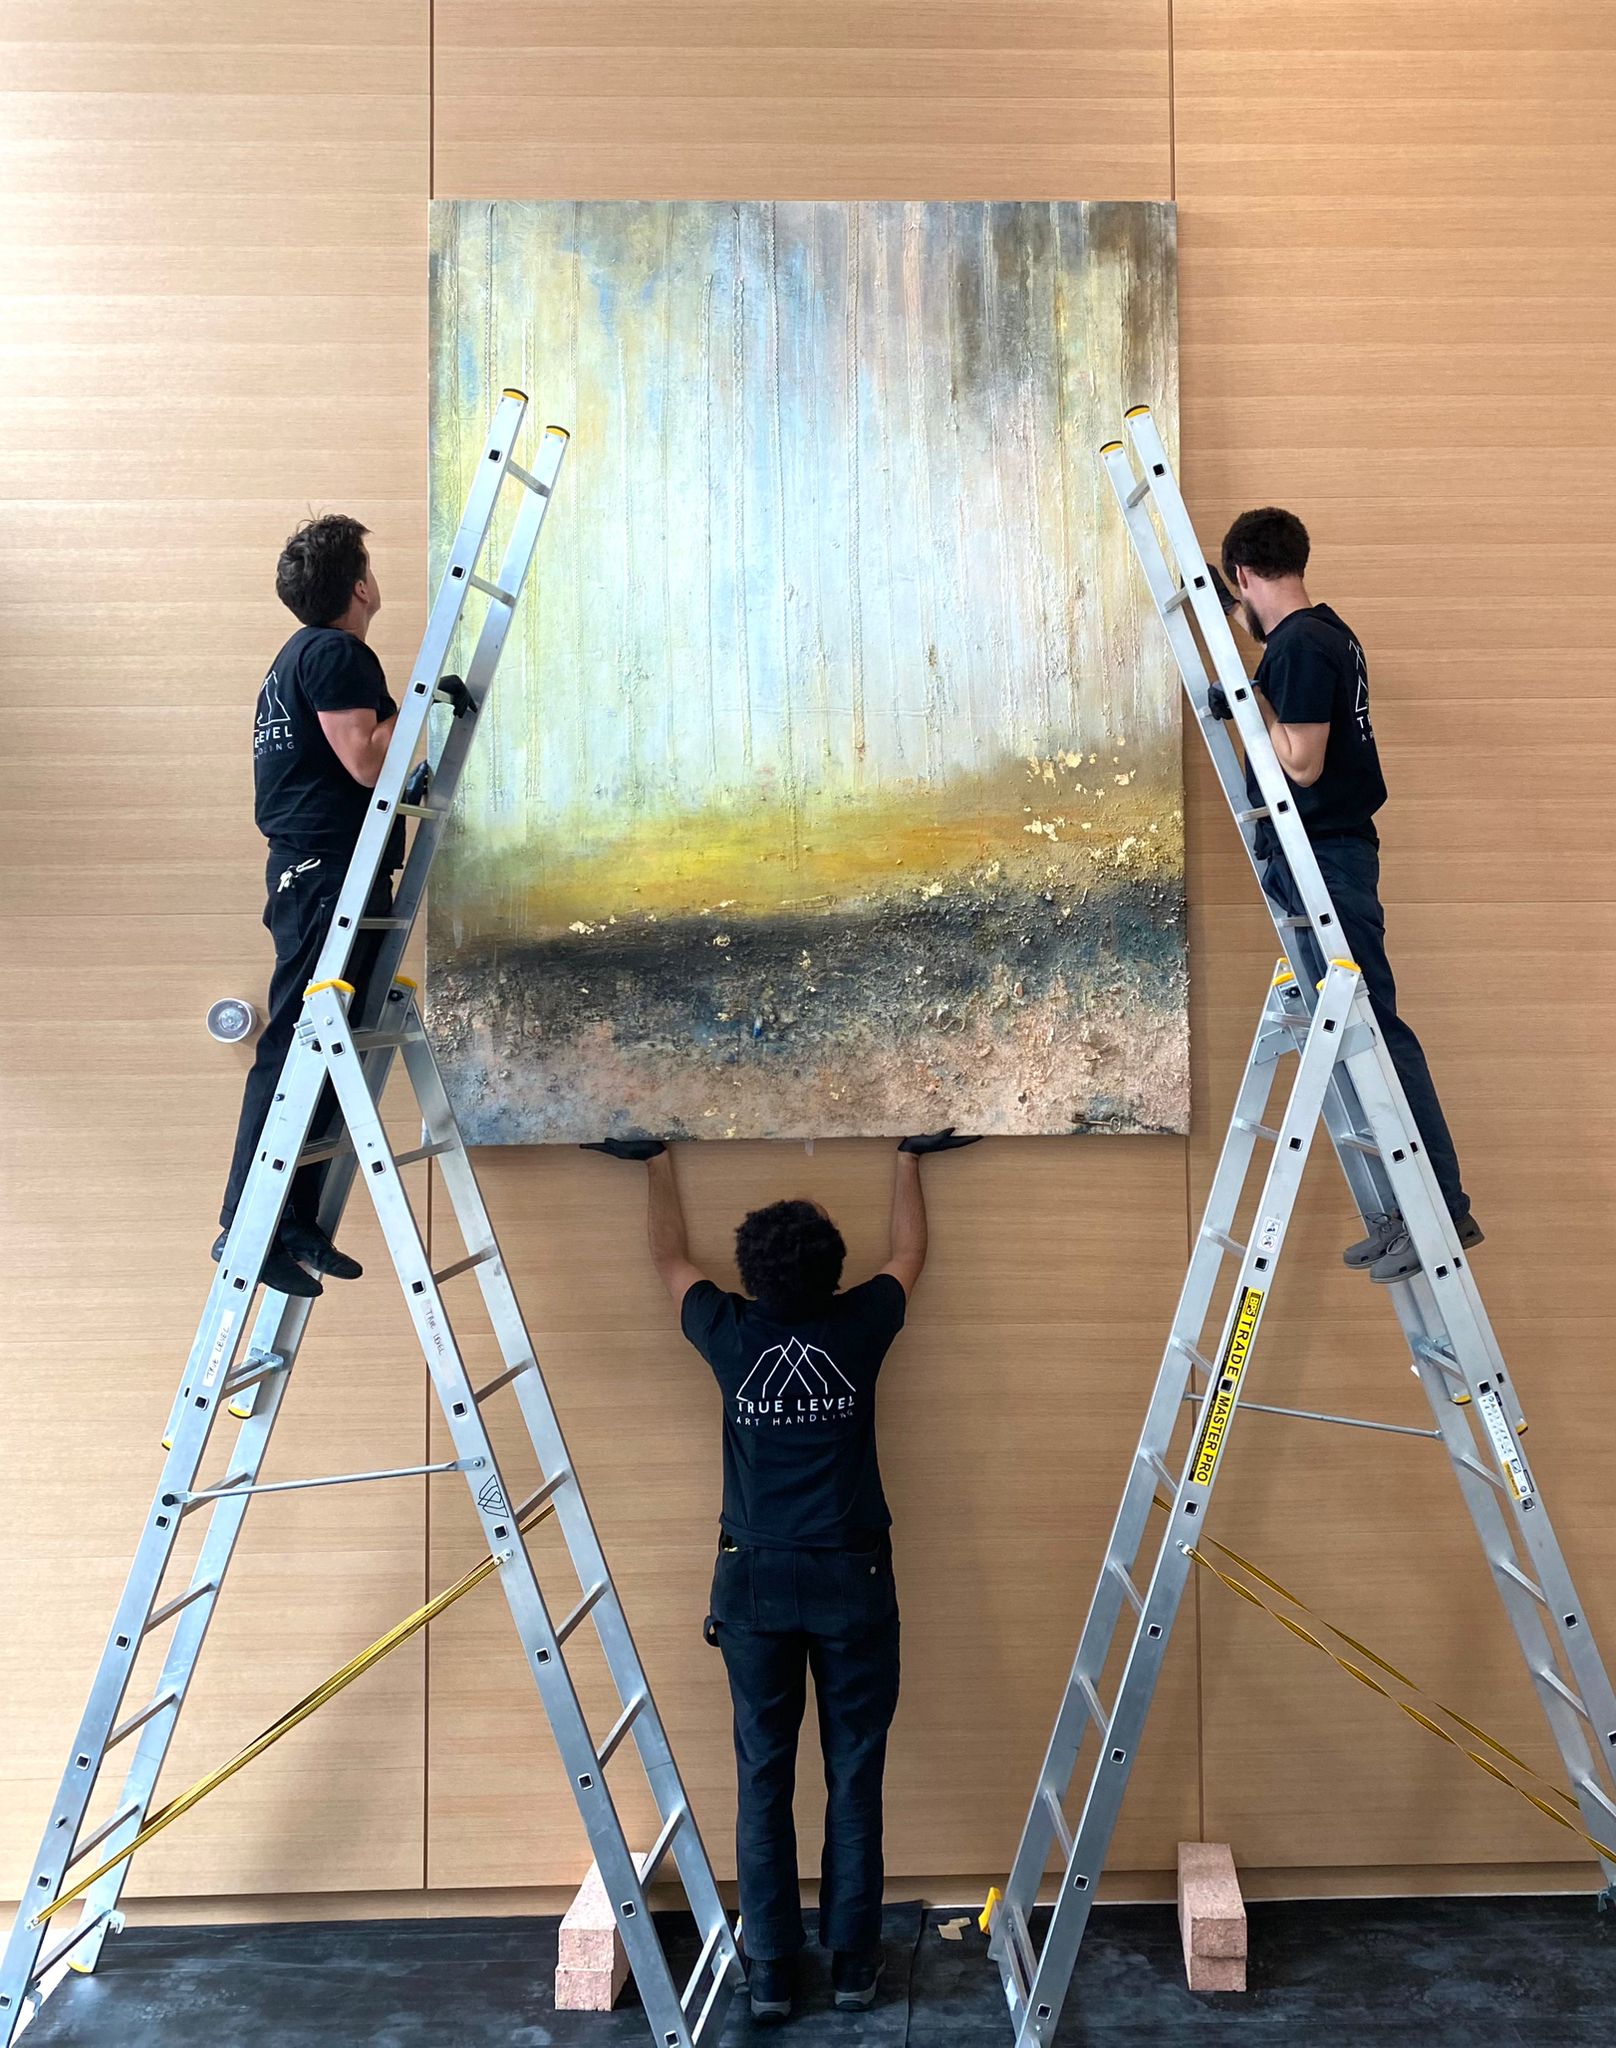 Three True Level Art Handling experts hanging a large piece of art safely on ladders.